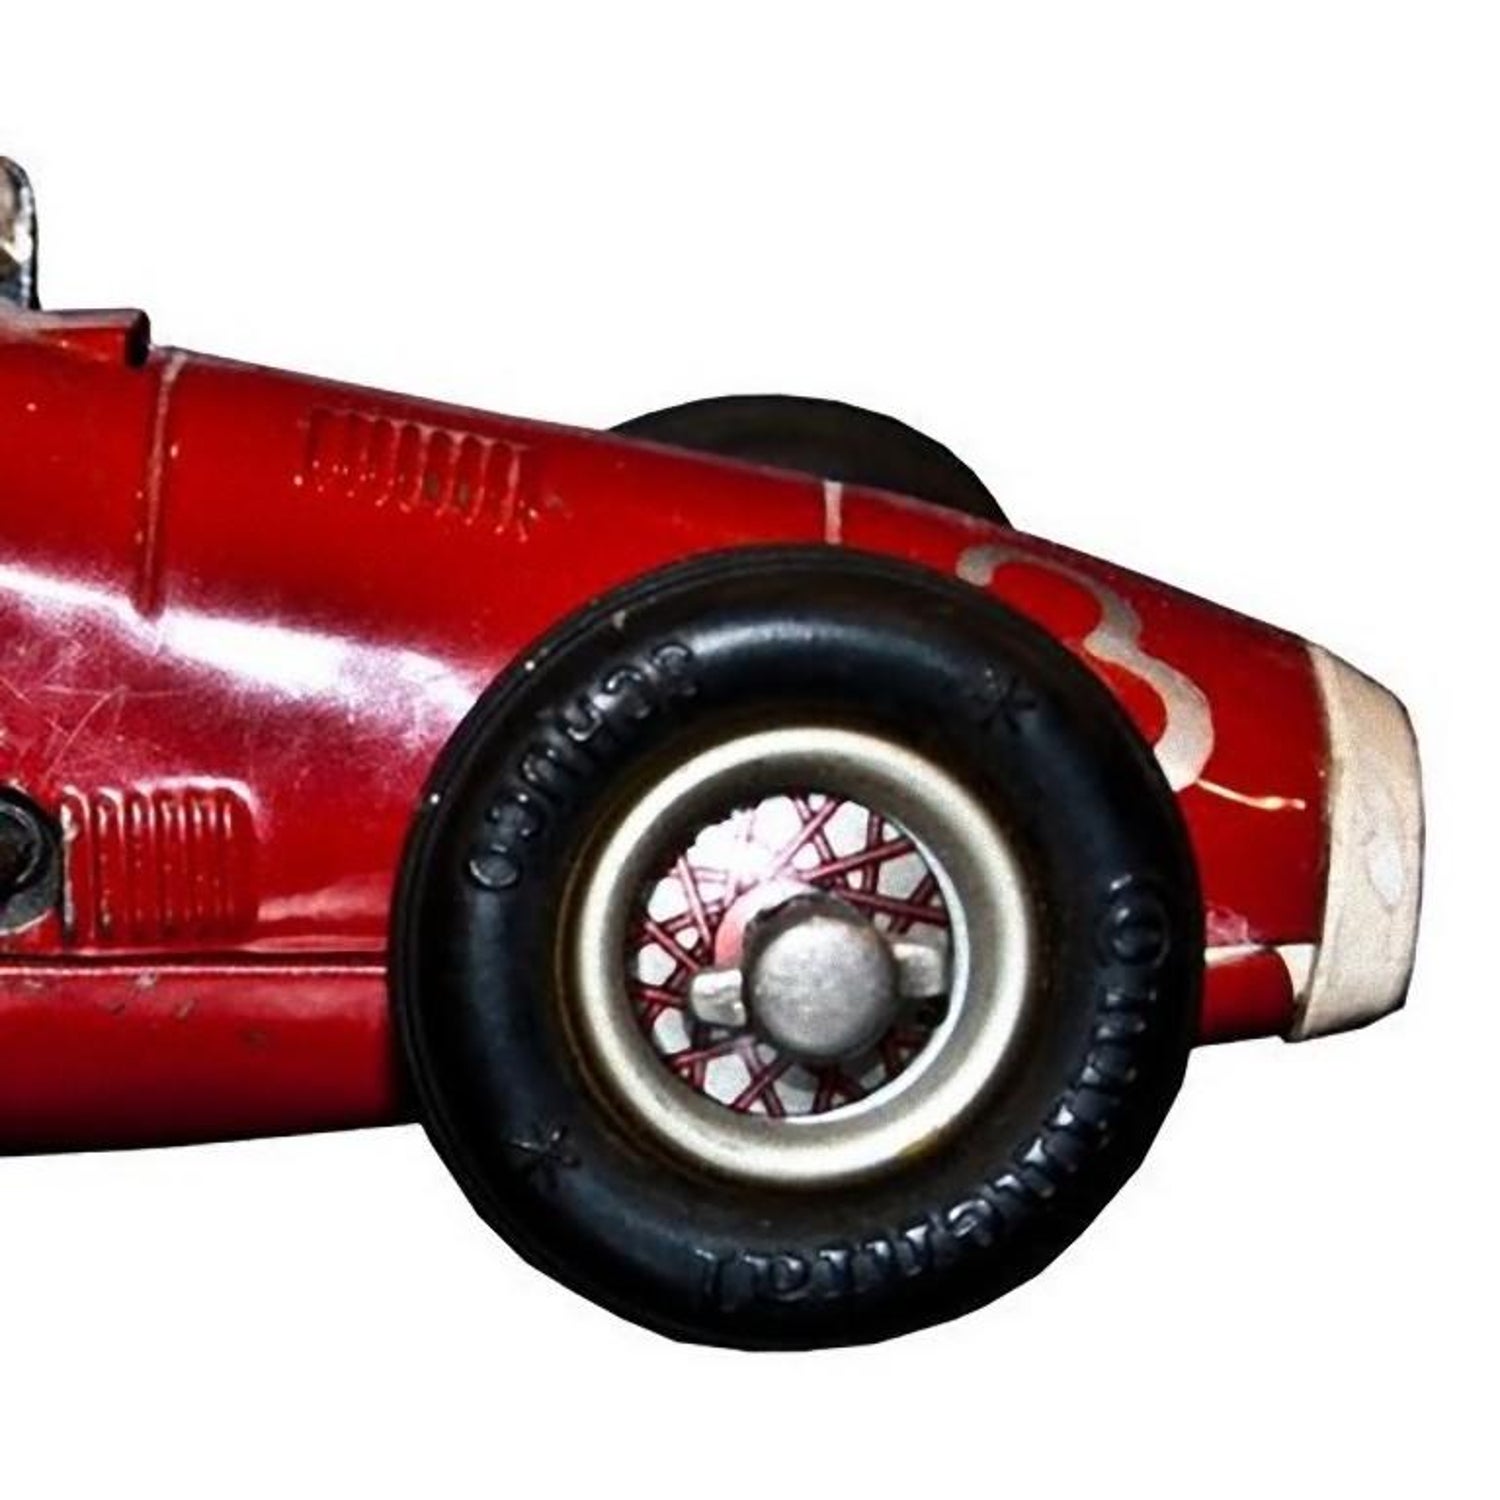 Wind Up Toy Car, Grand Prix Racer 1070, Made by by Schuco, 1950s at 1stDibs